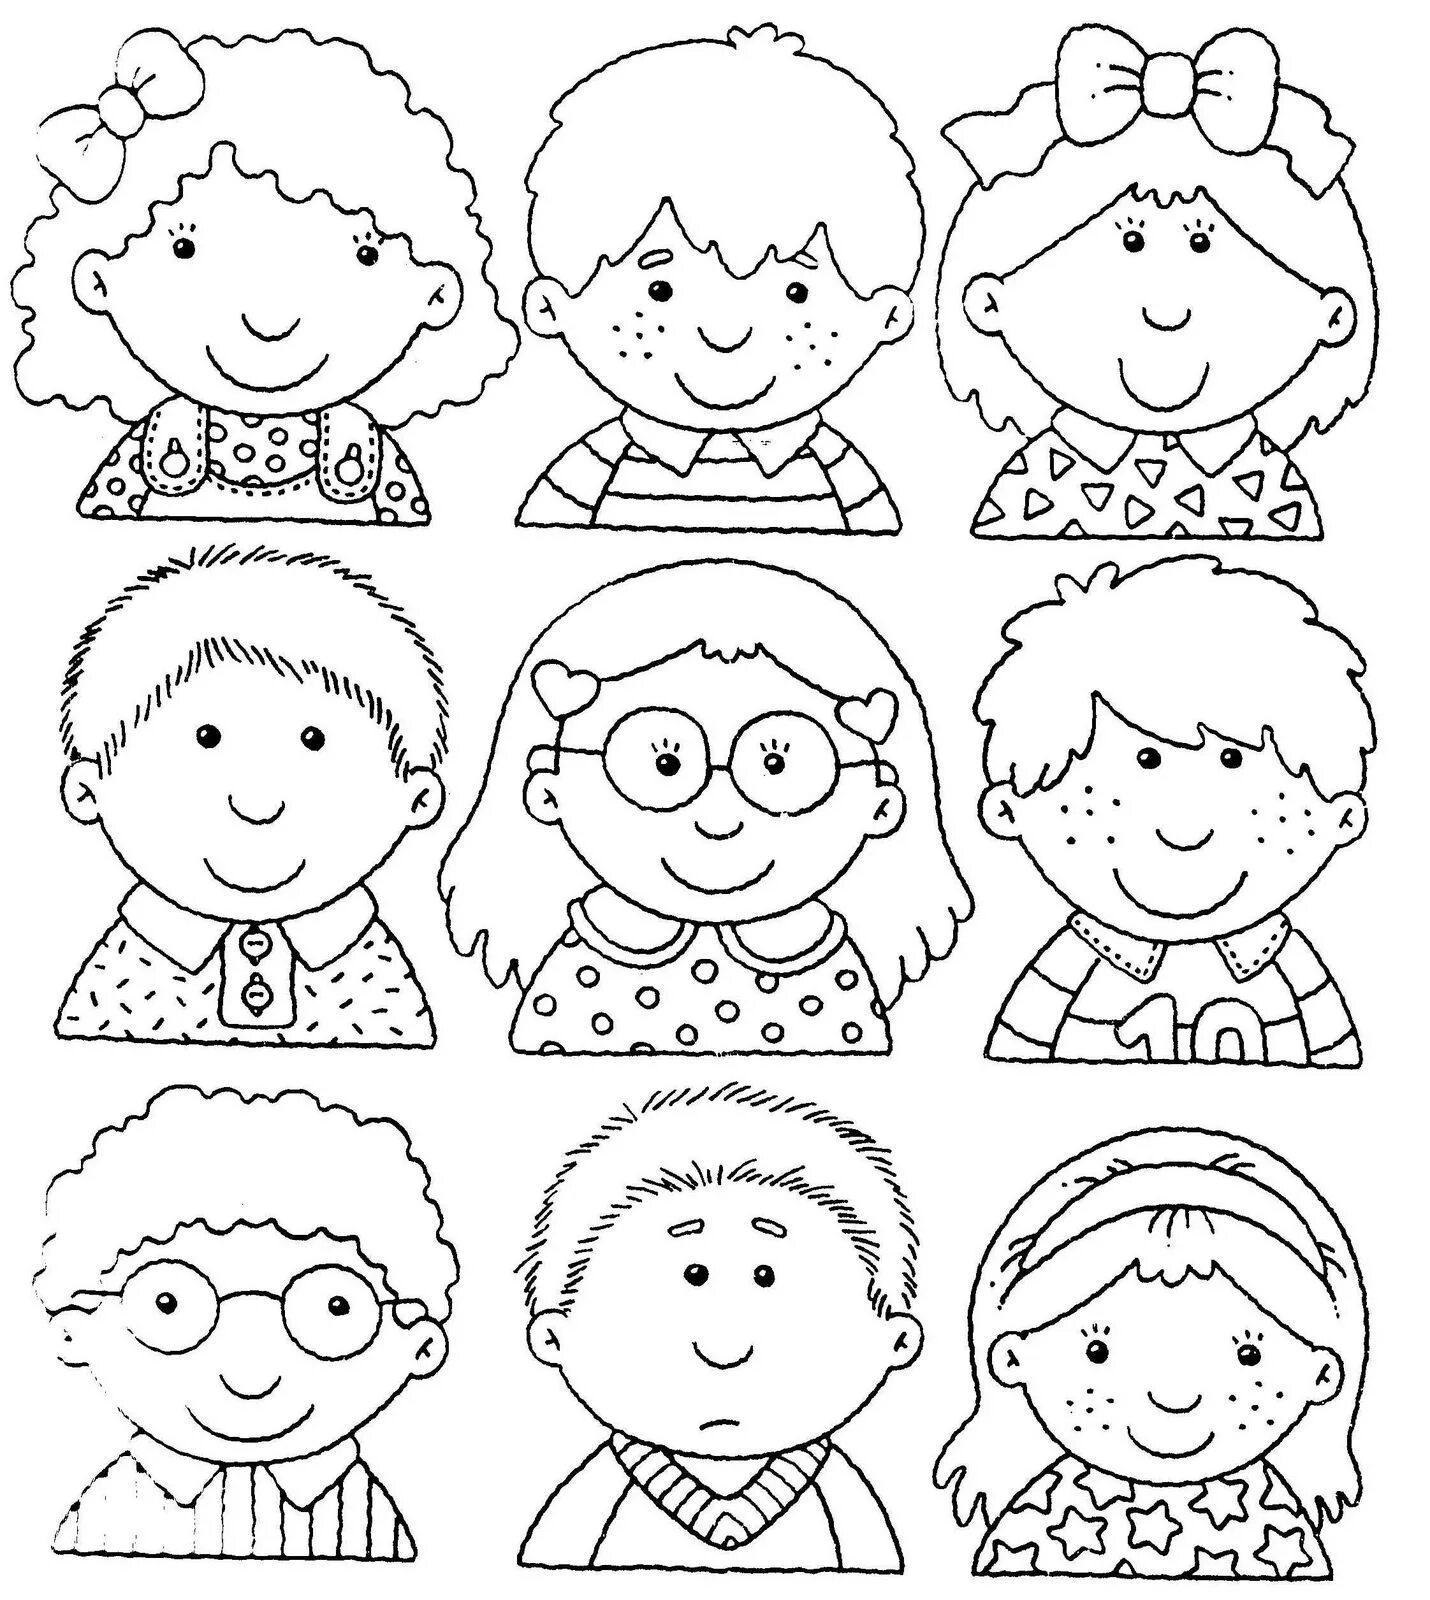 Disturbing emotion coloring pages for kids